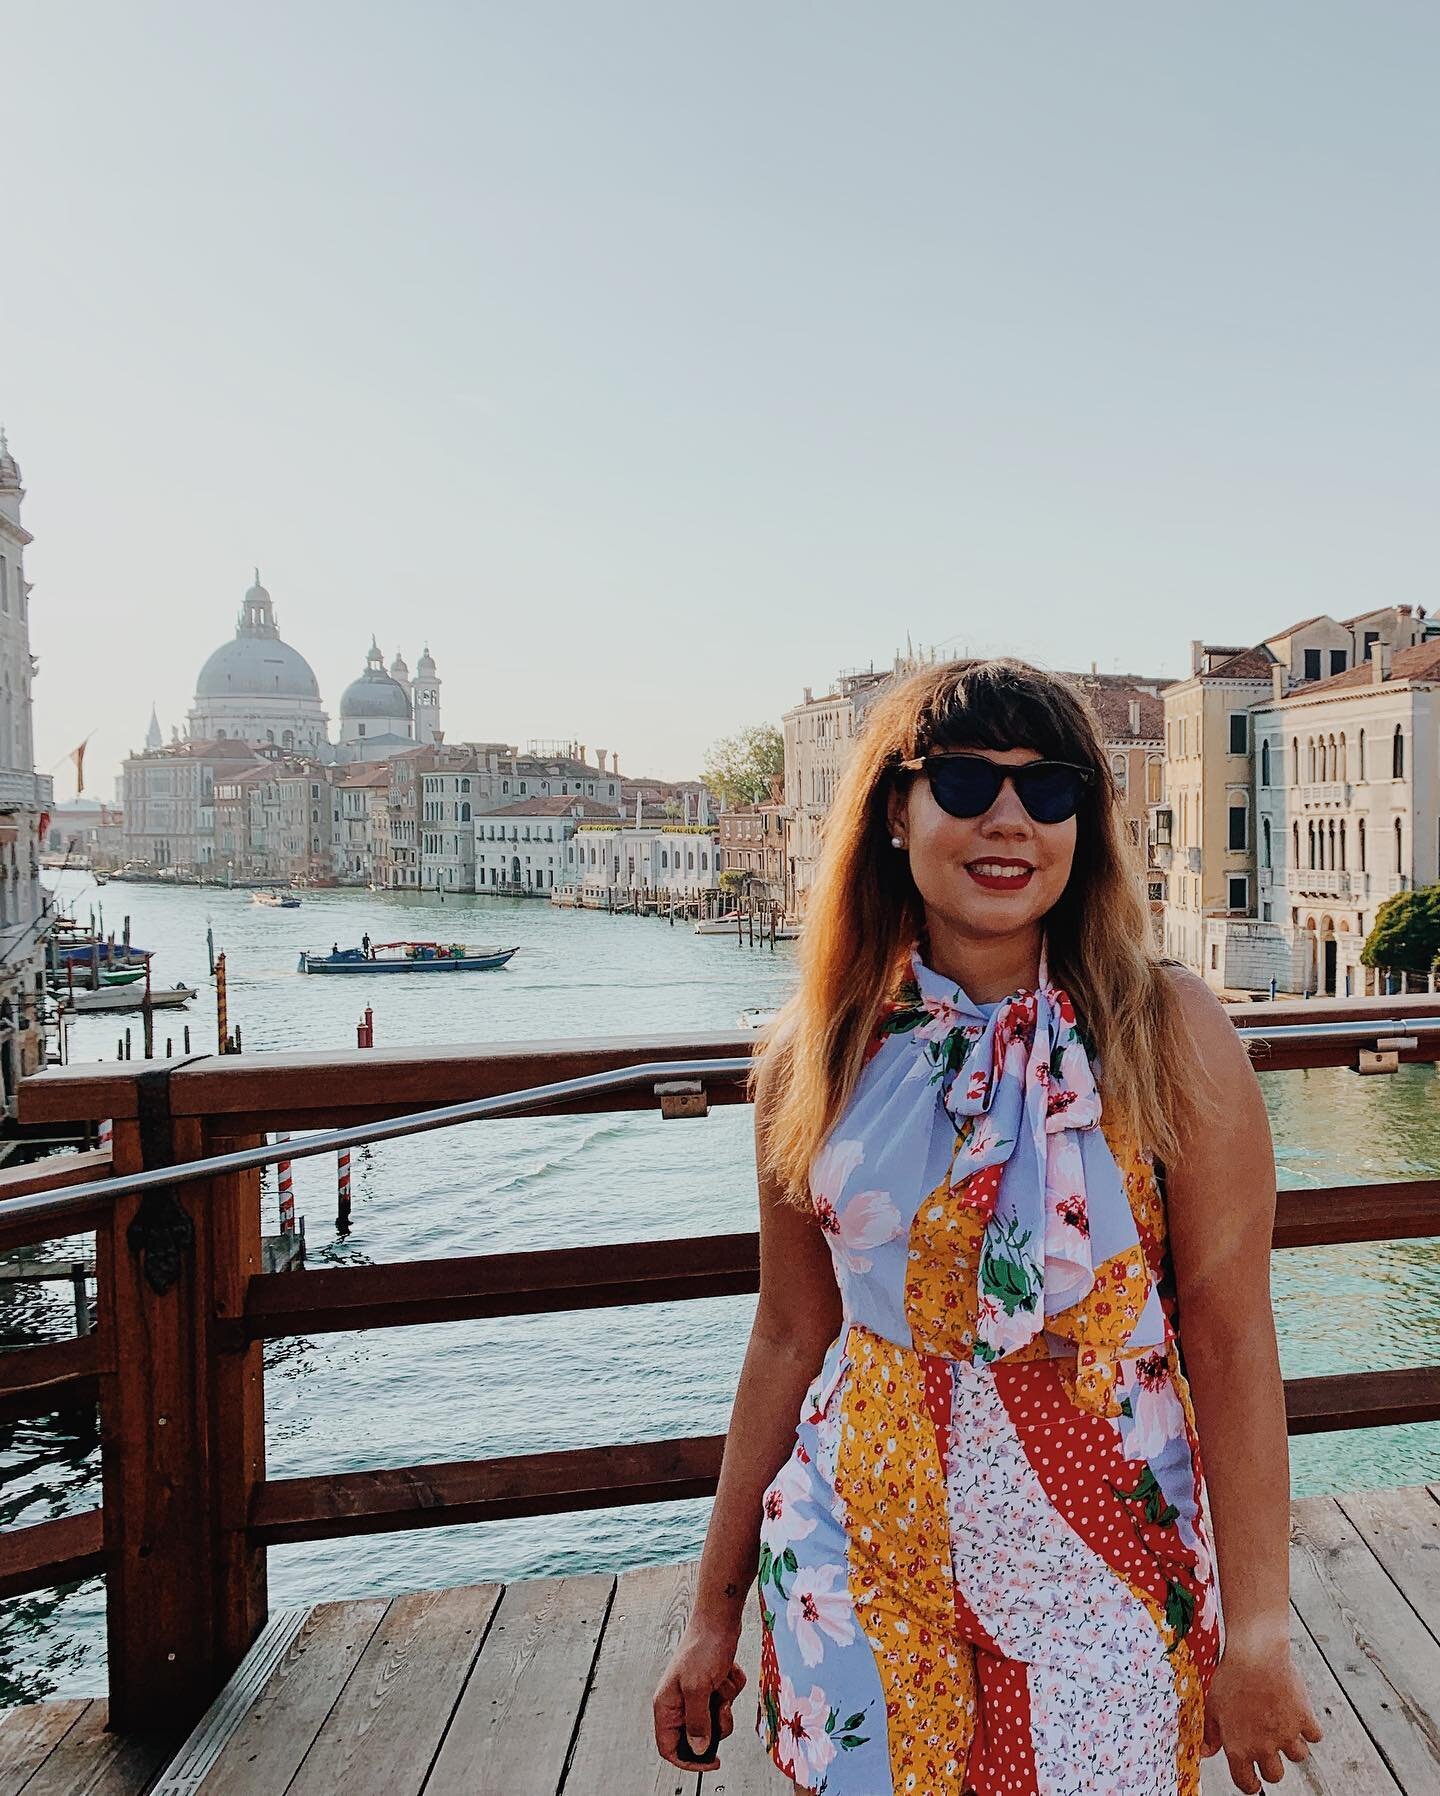 Did you know that there are 417 bridges in Venice, and 72 of those bridges are private? 
.
.
.
.
.
#travel #TLPicks #LiveTravelChannel #tripadvisor #hellofrom #BBCTravel #travelbug #globetrotter #traveldeeper #trip #wanderlust #peoplescreatives #dame